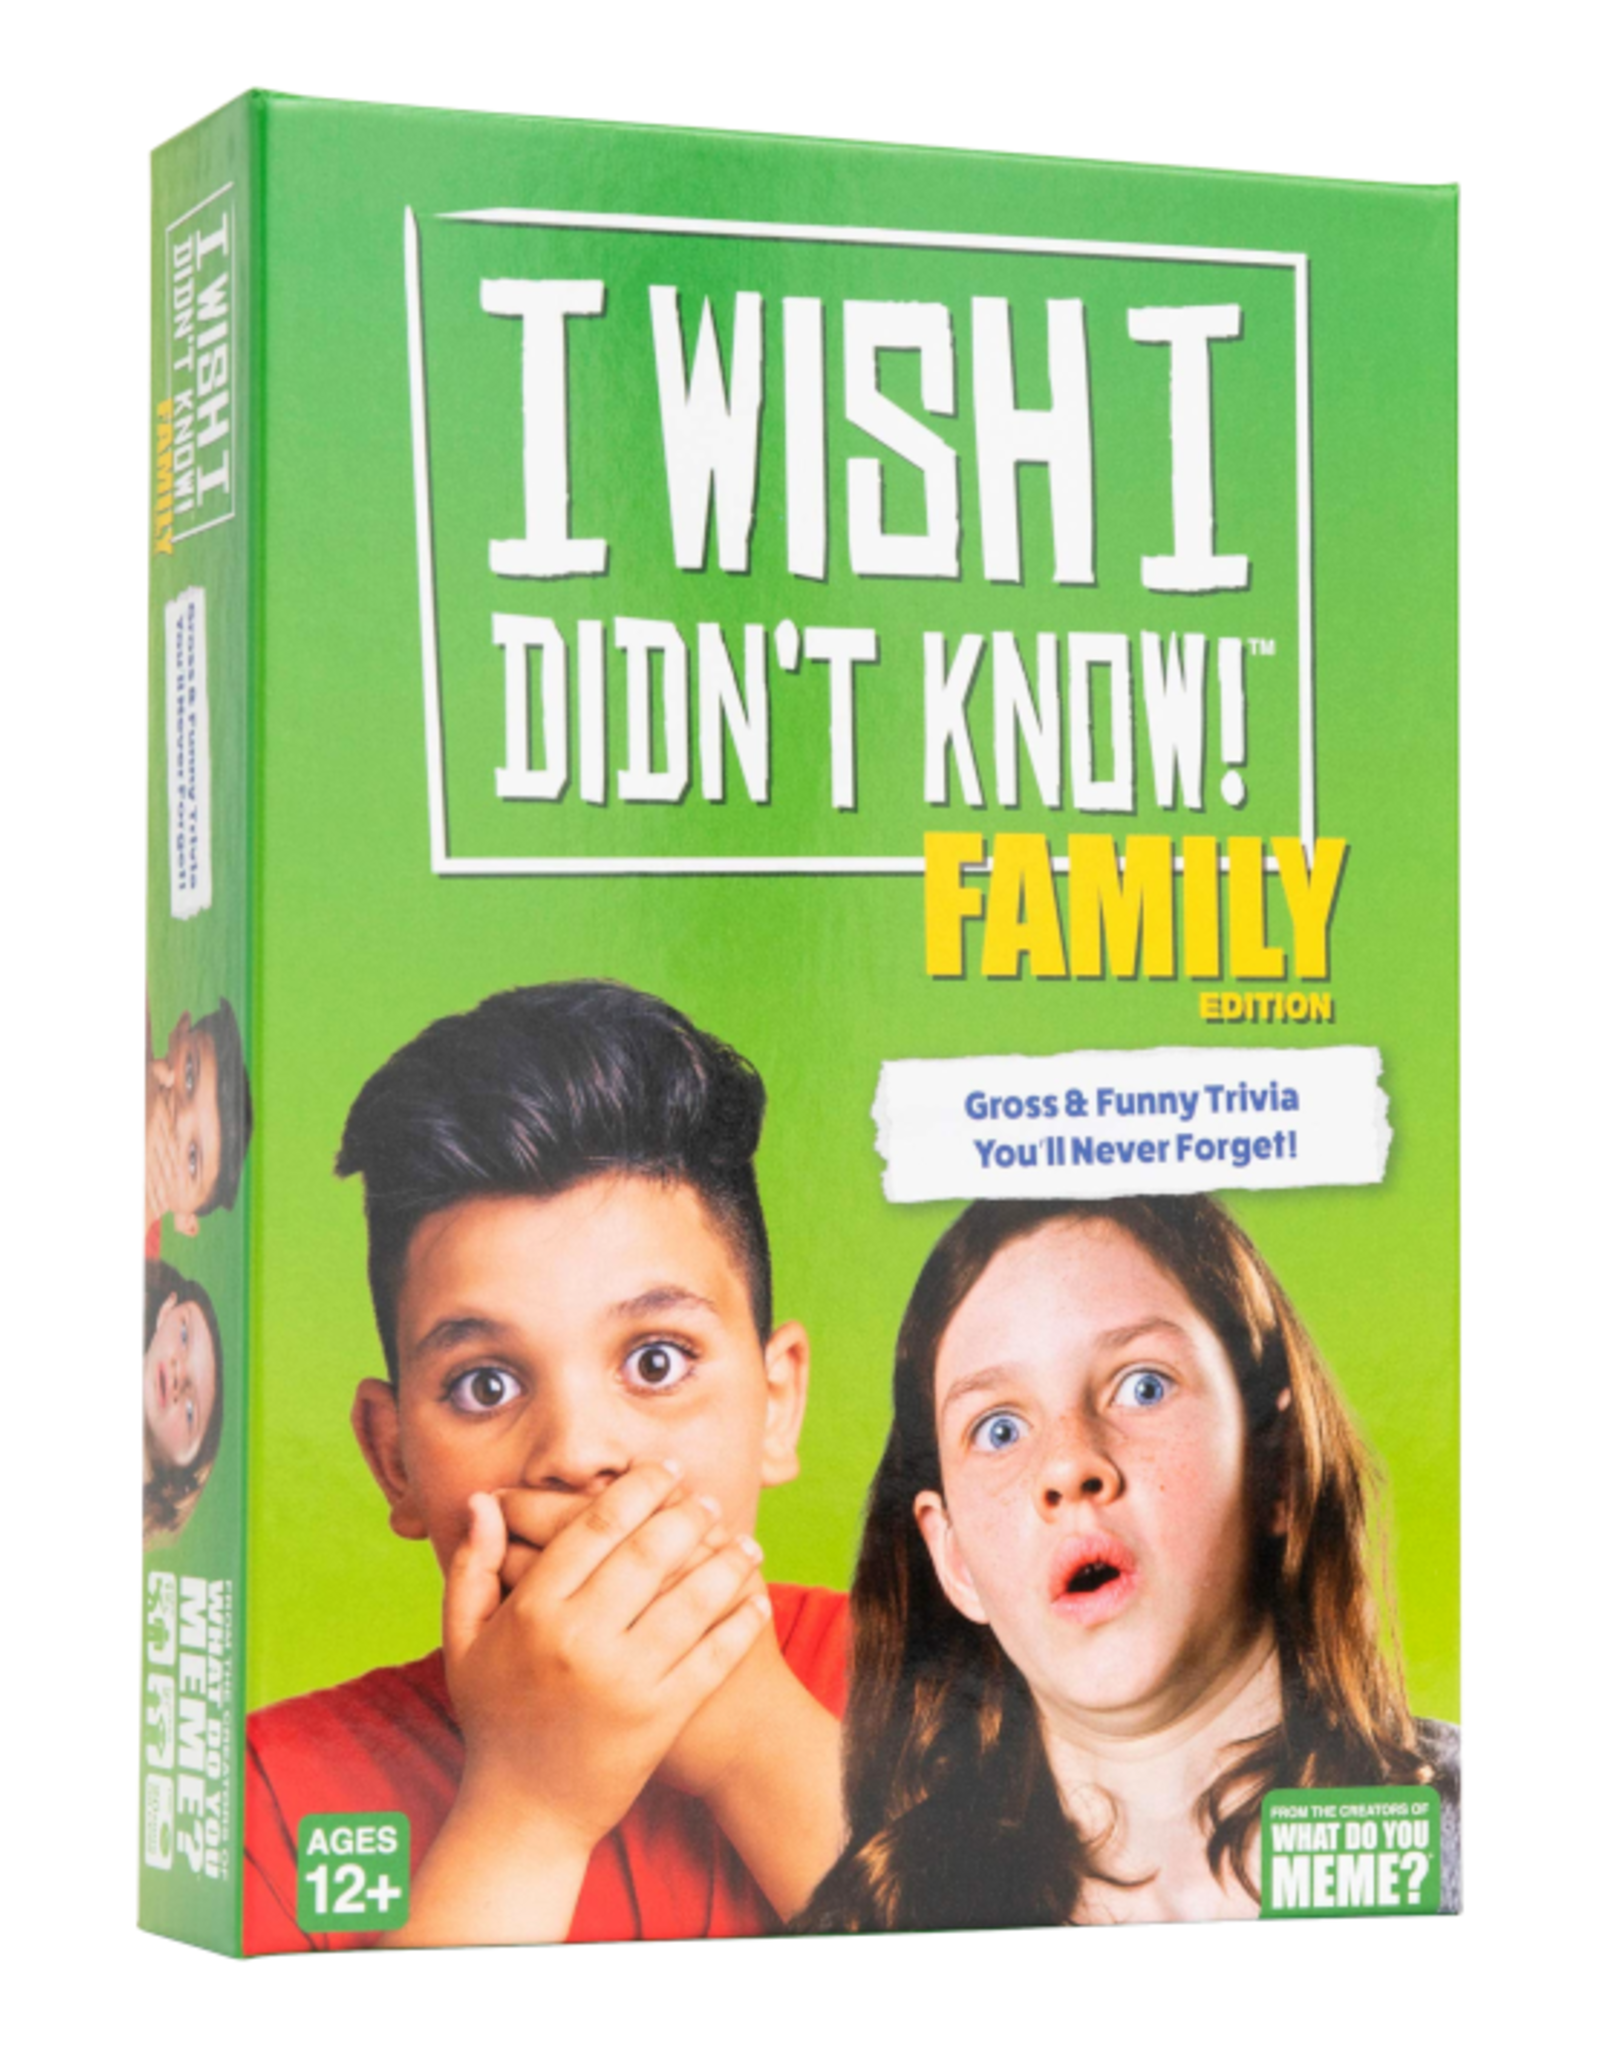 What do you Meme What do you Meme - I Wish I Didn't Know Family Edition